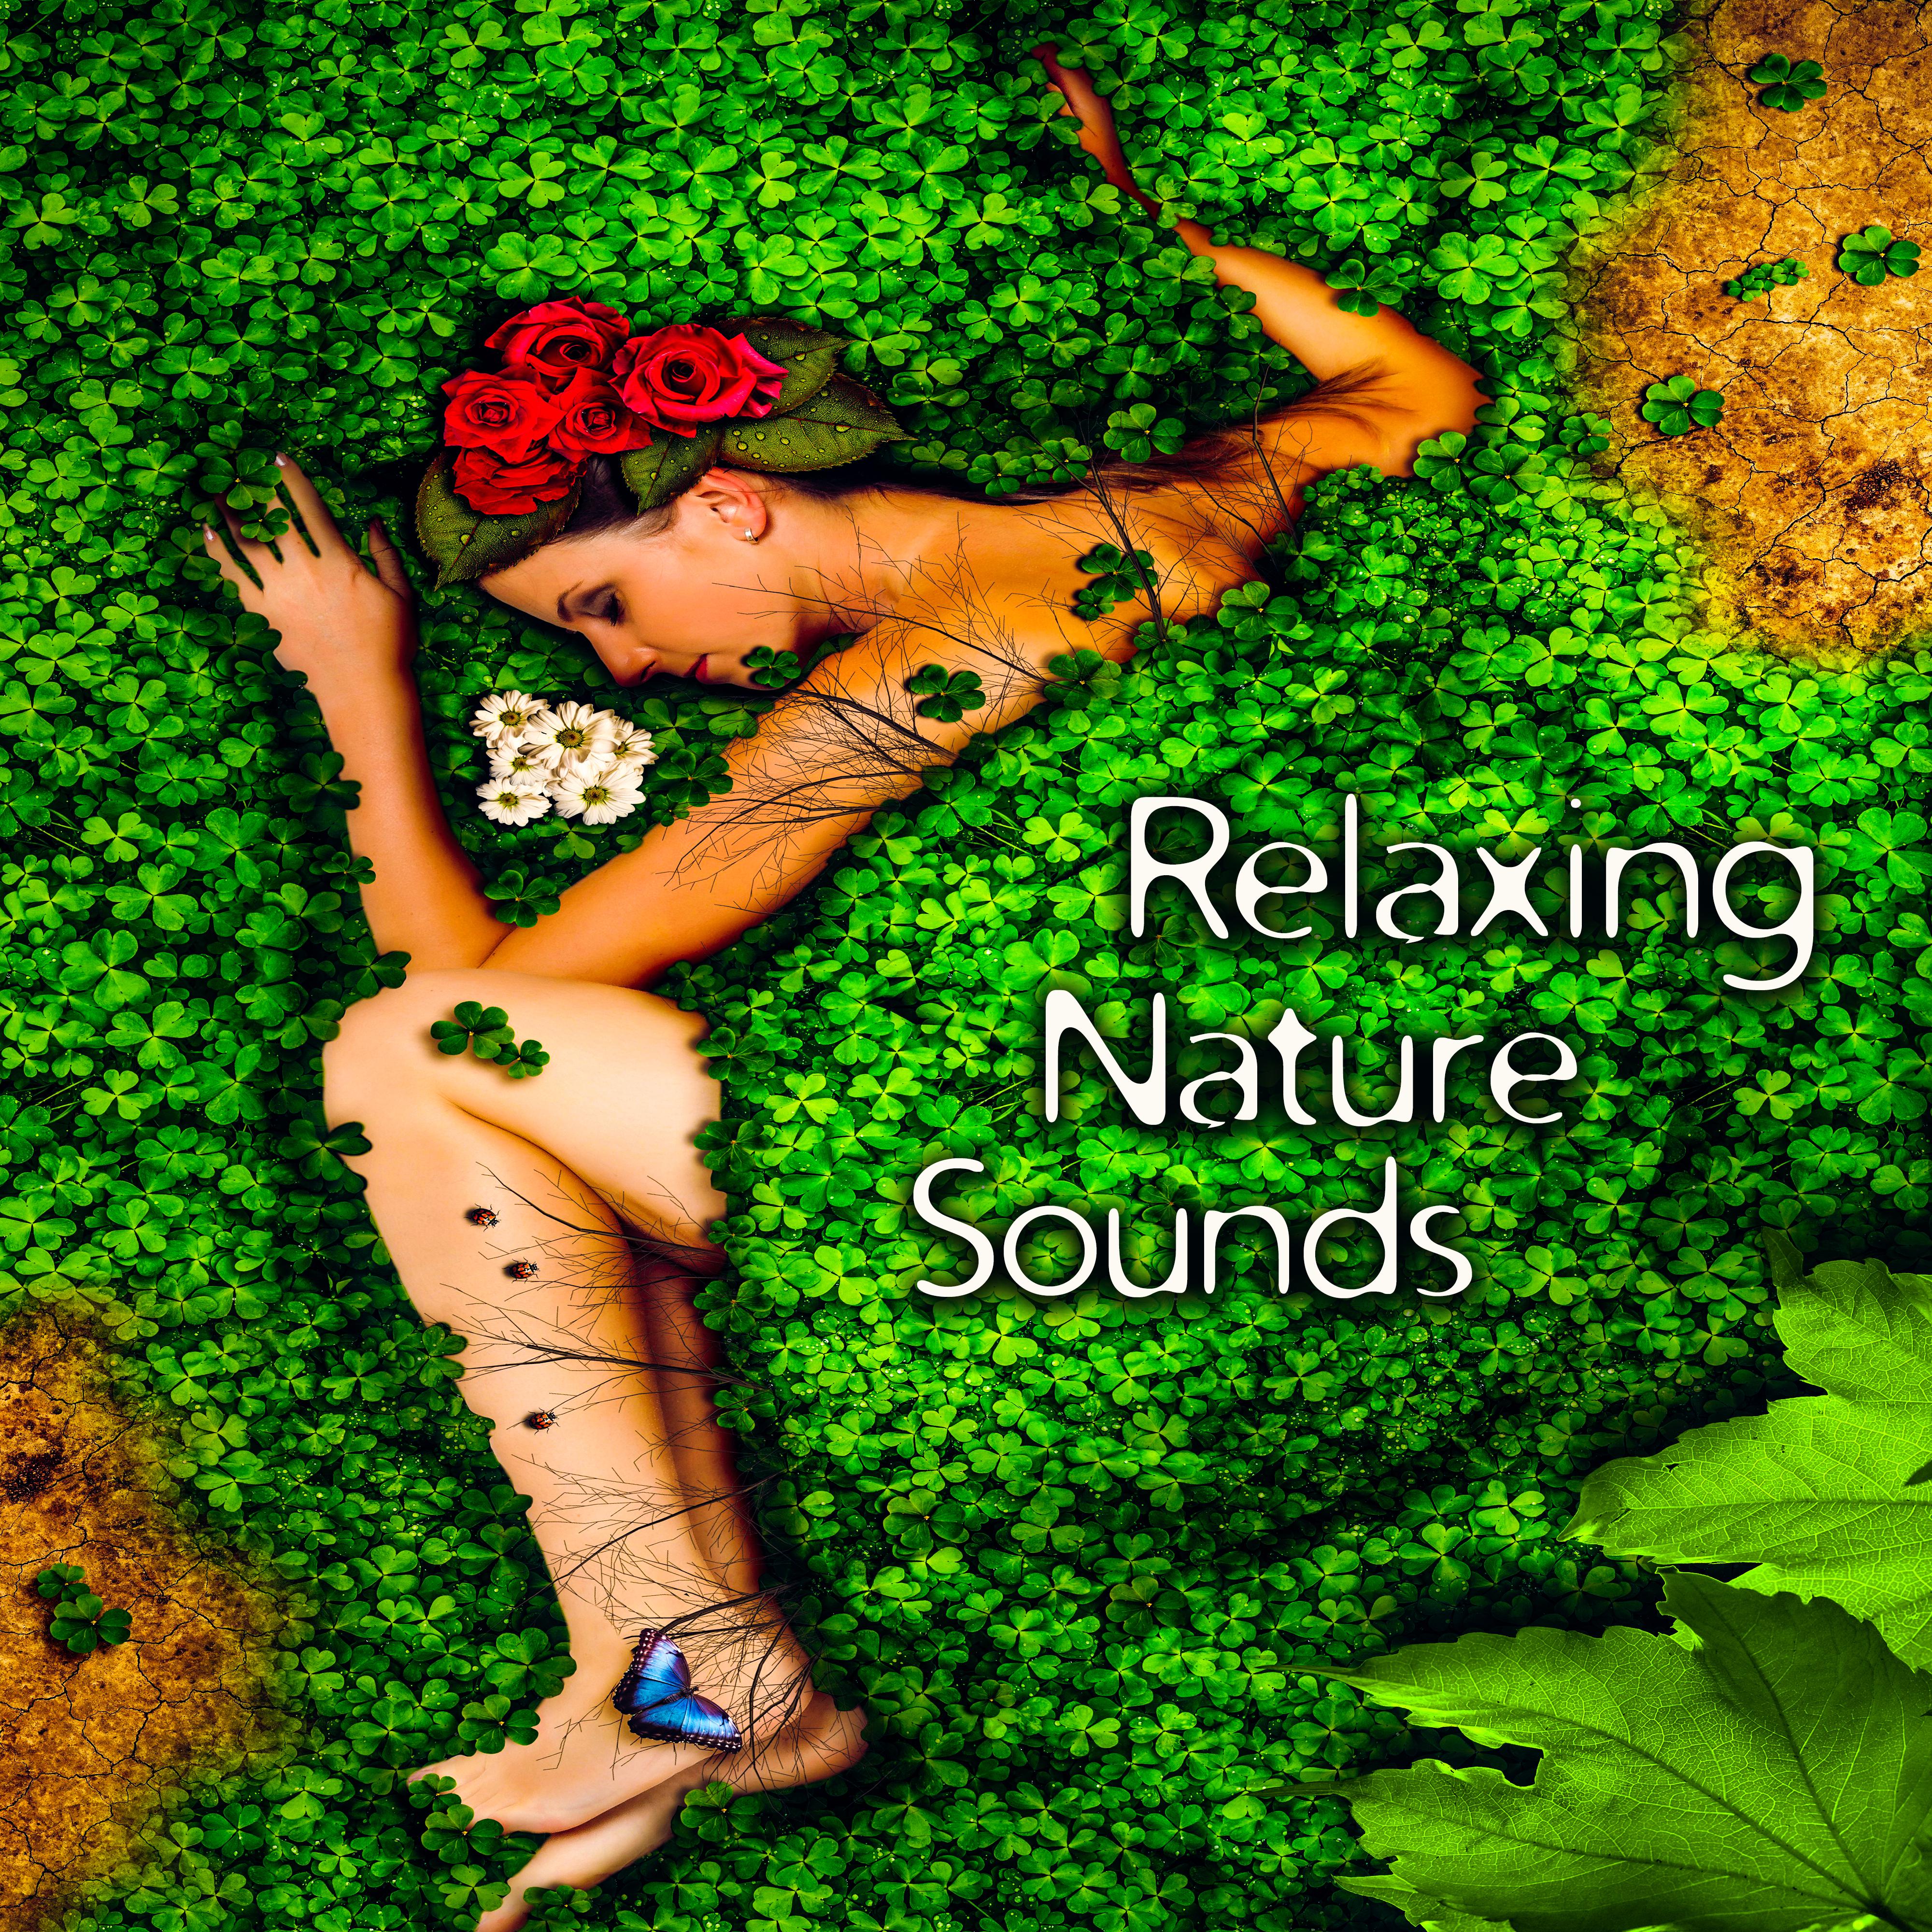 Relaxing Nature Sounds  Soft Music to Calm Down, Easy Listening, New Age Nature Melodies, Quiet Sounds